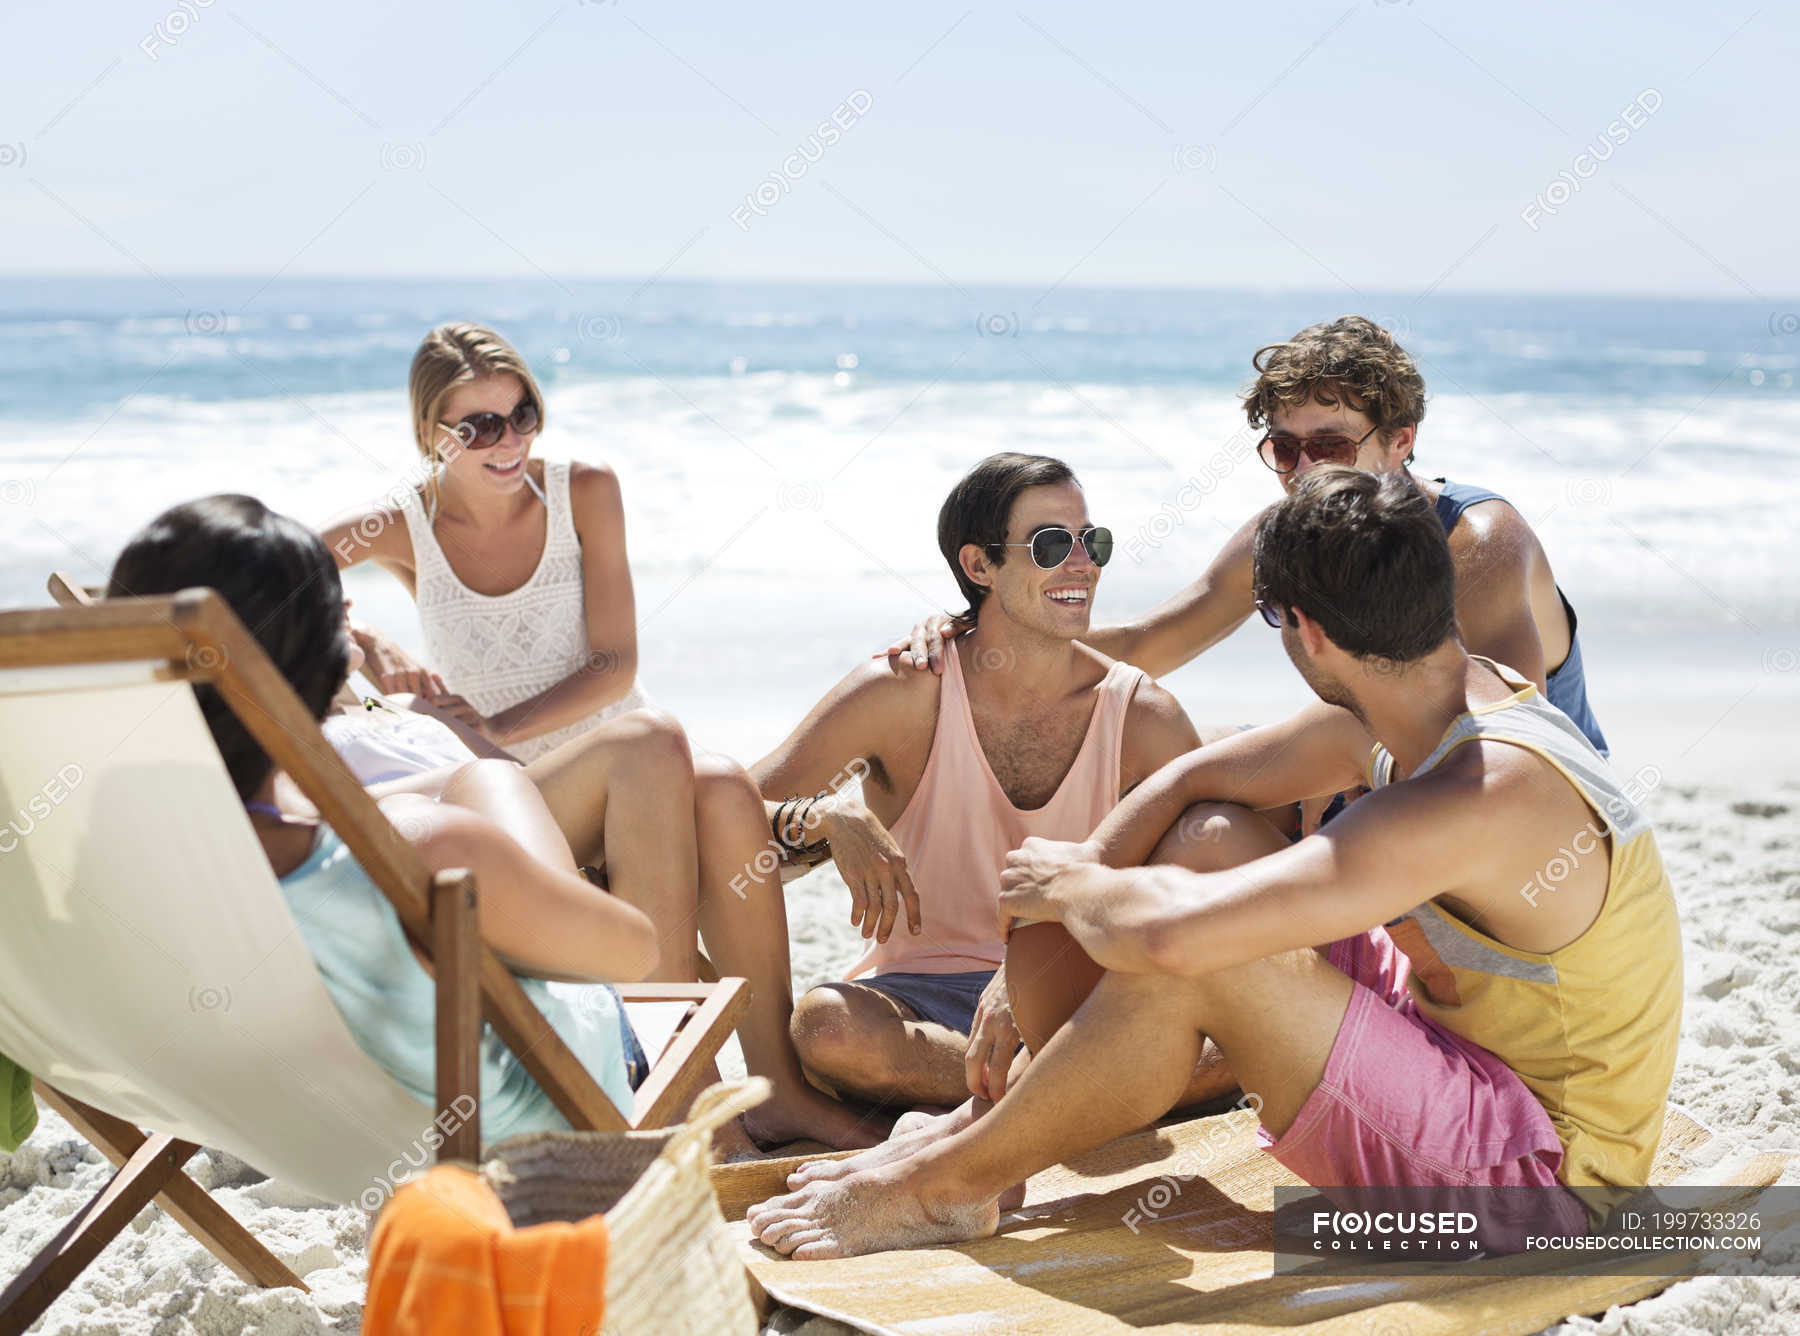 Happy Caucasian Friends Hanging Out On Beach Horizontal Together Stock Photo 199733326